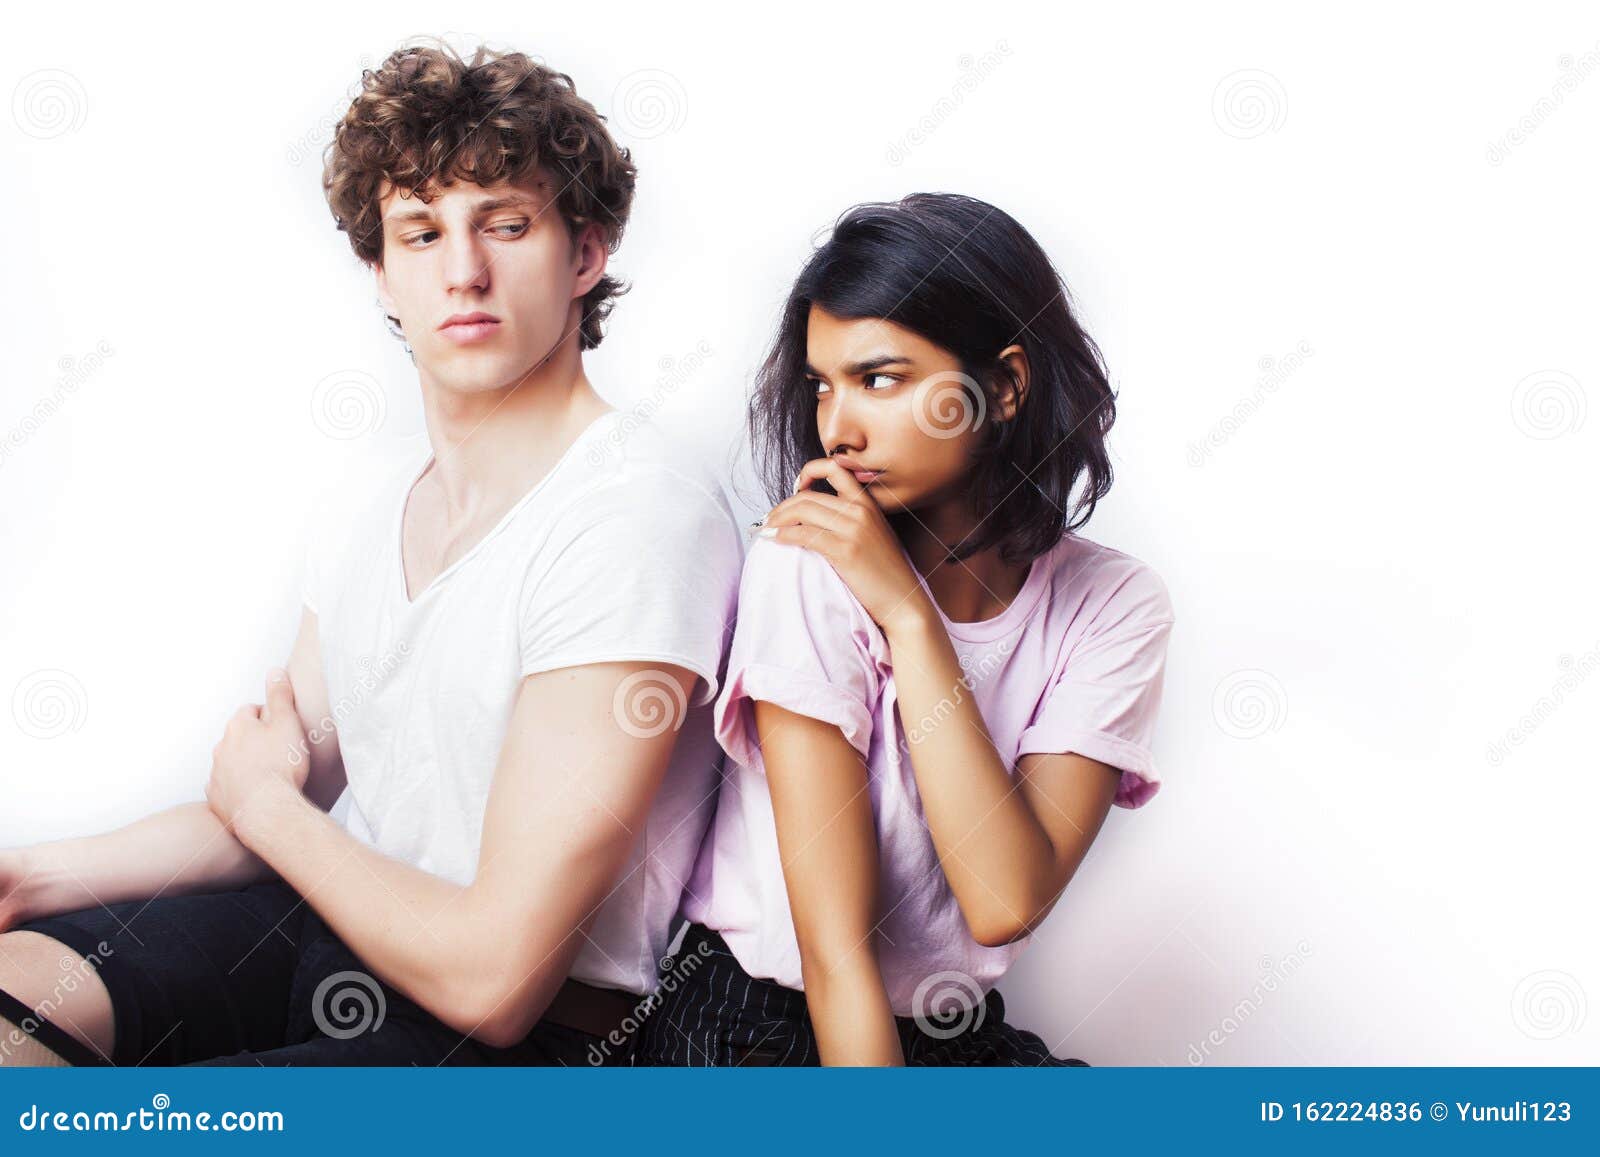 Best Friends Teenage Girl And Boy Together Having Fun Posing Emotional On White Background Couple Happy Smiling Stock Photo Image Of Beauty Besties